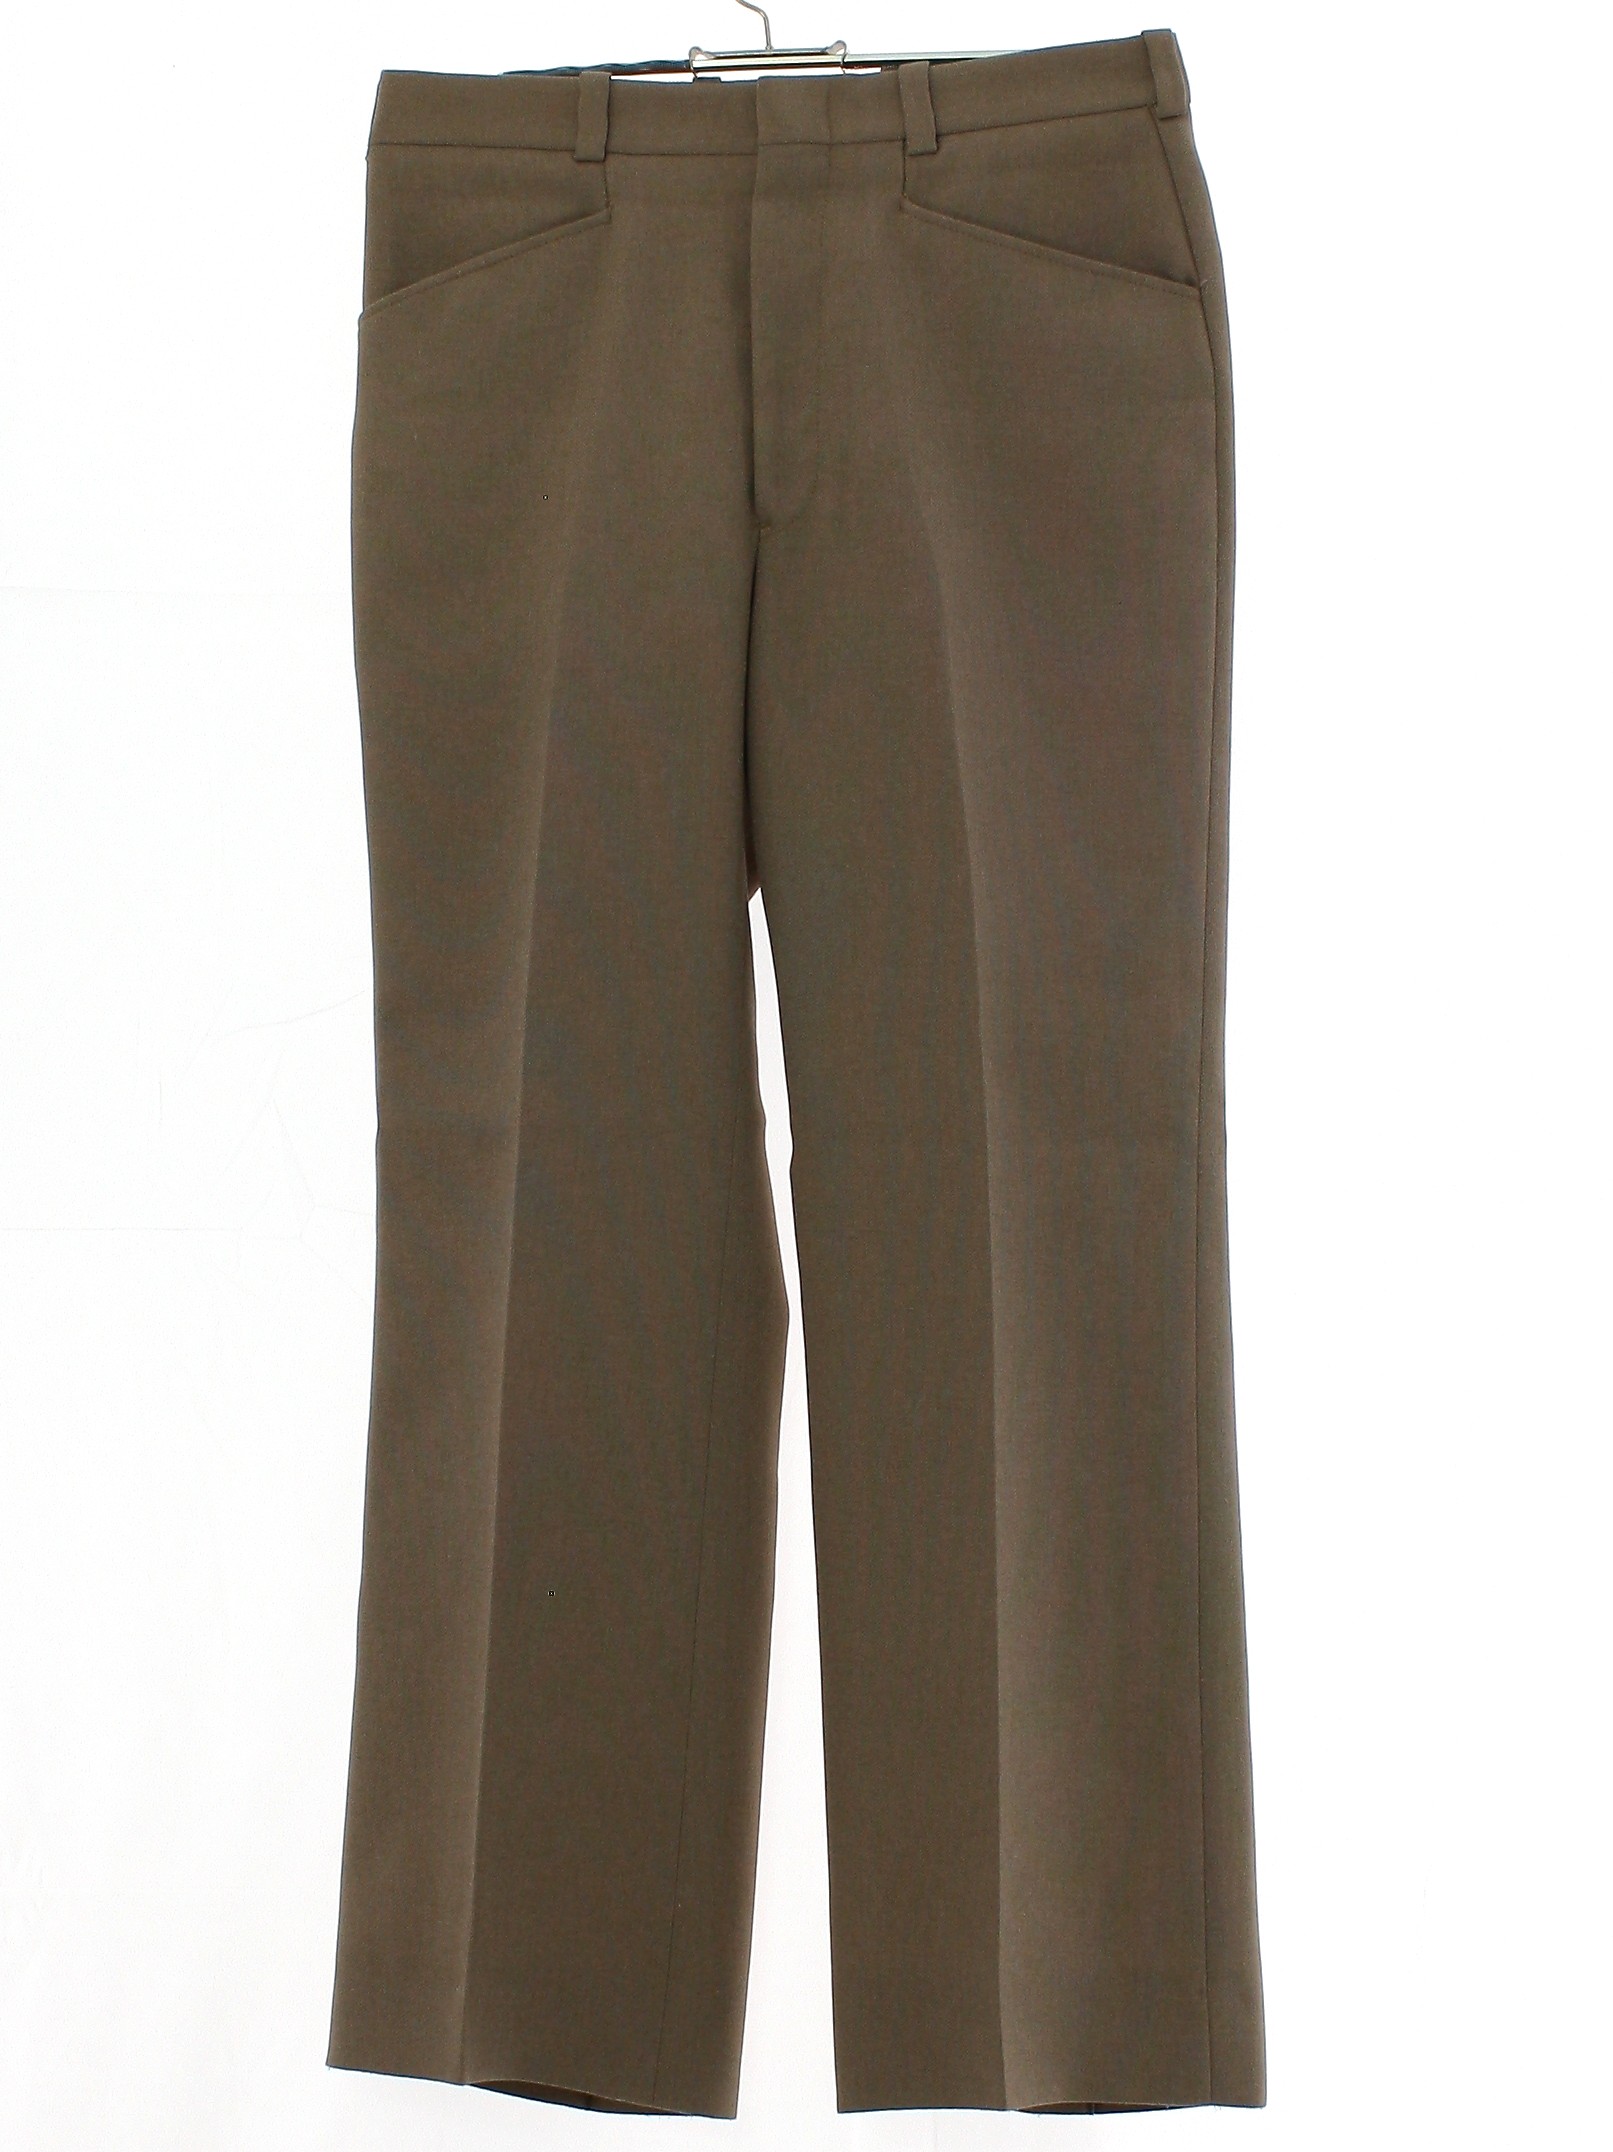 1970's Pants (The Knack): Late 70s -The Knack- Mens cocoa brown solid ...